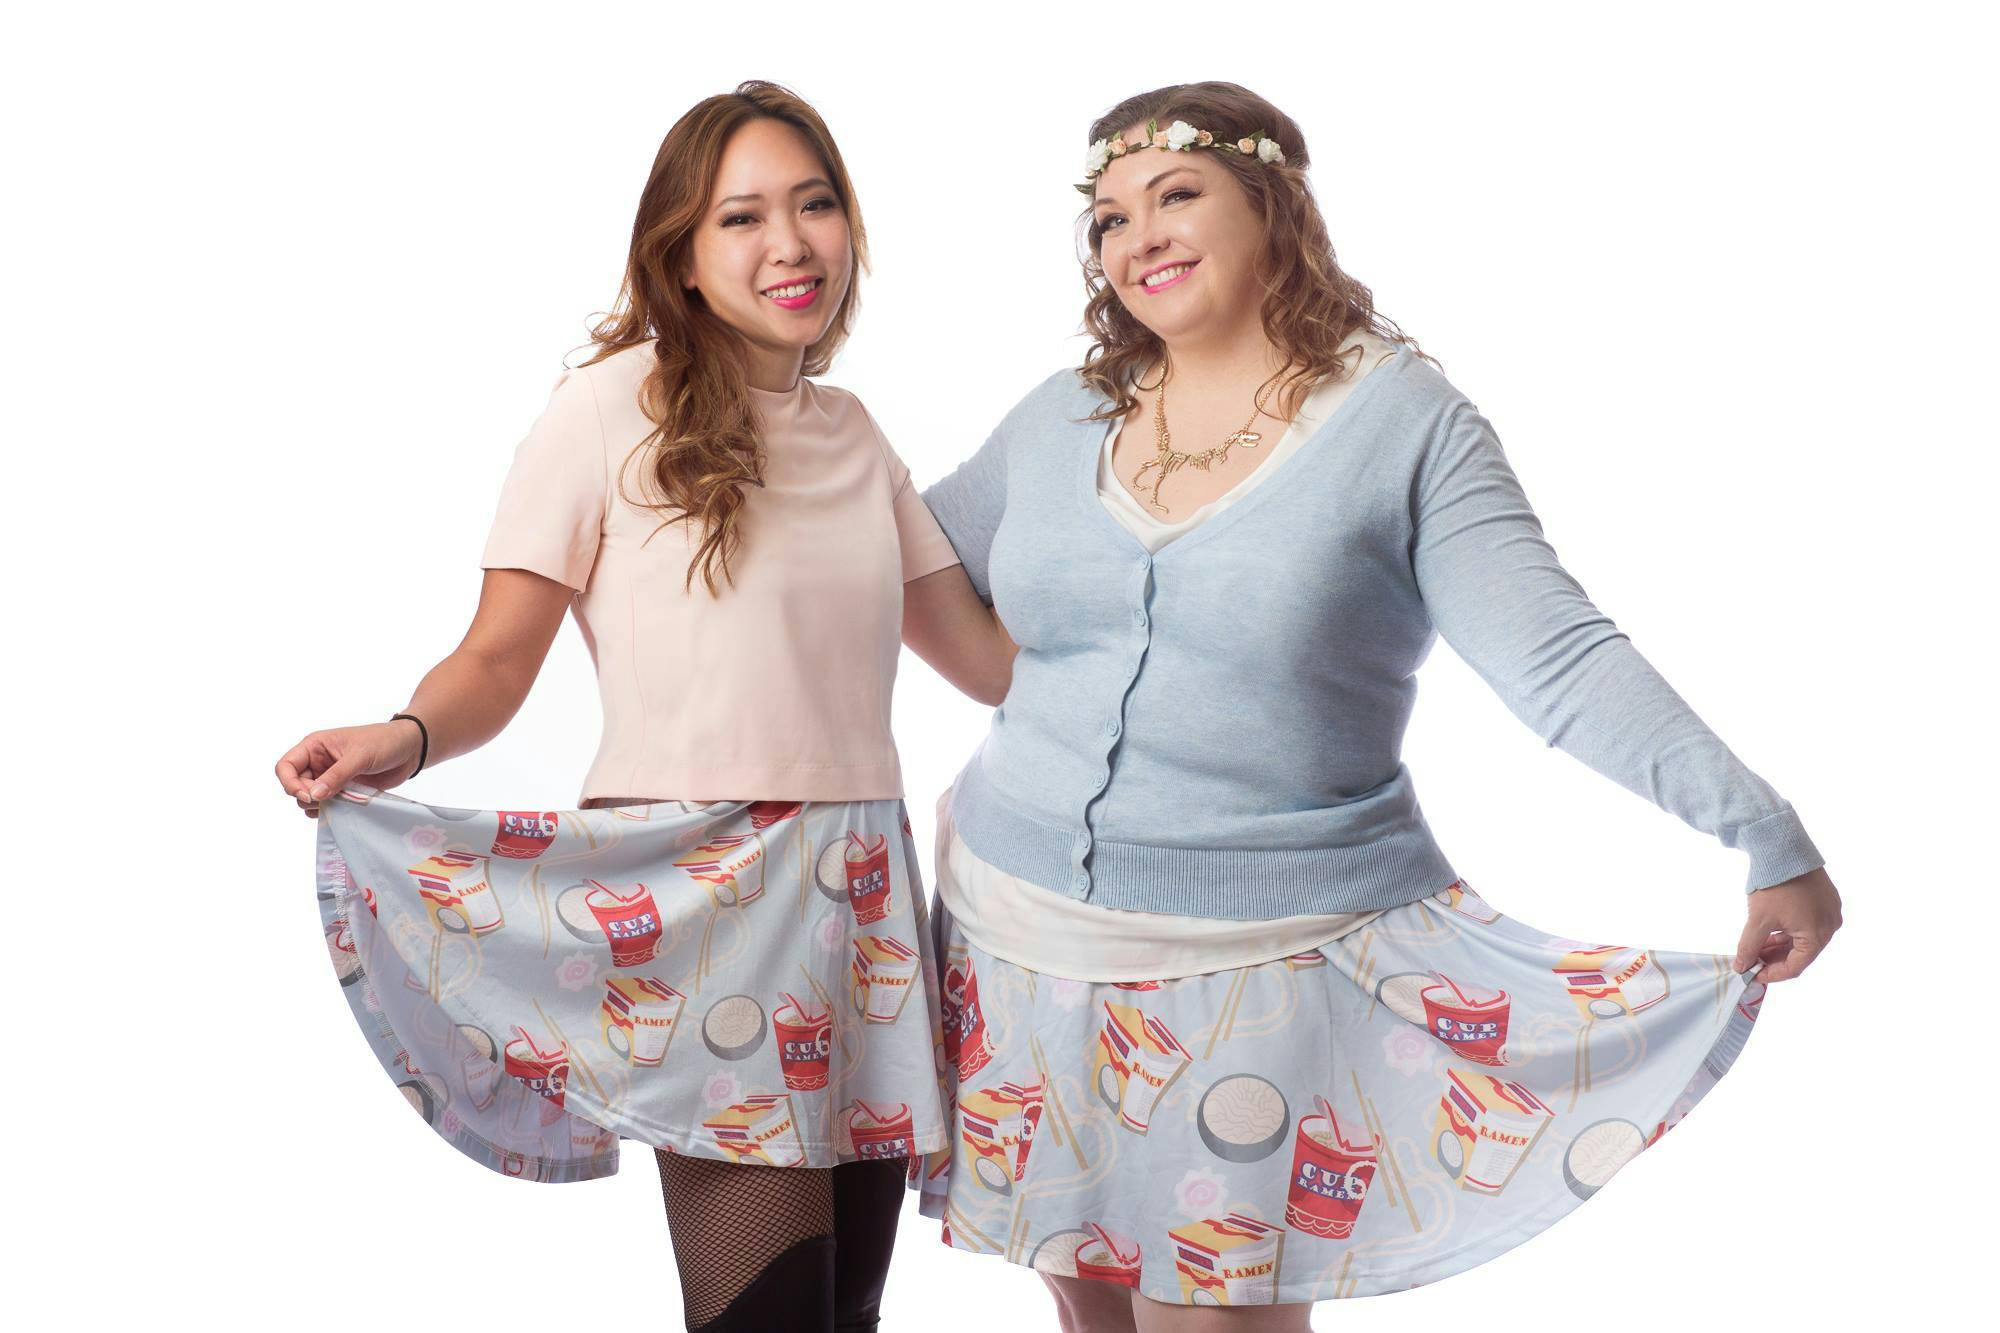 Owners Victoria Ying (left) and Georgia Kicklighter (right) wearing Lace and Lore's Insta-Ramen skirts.